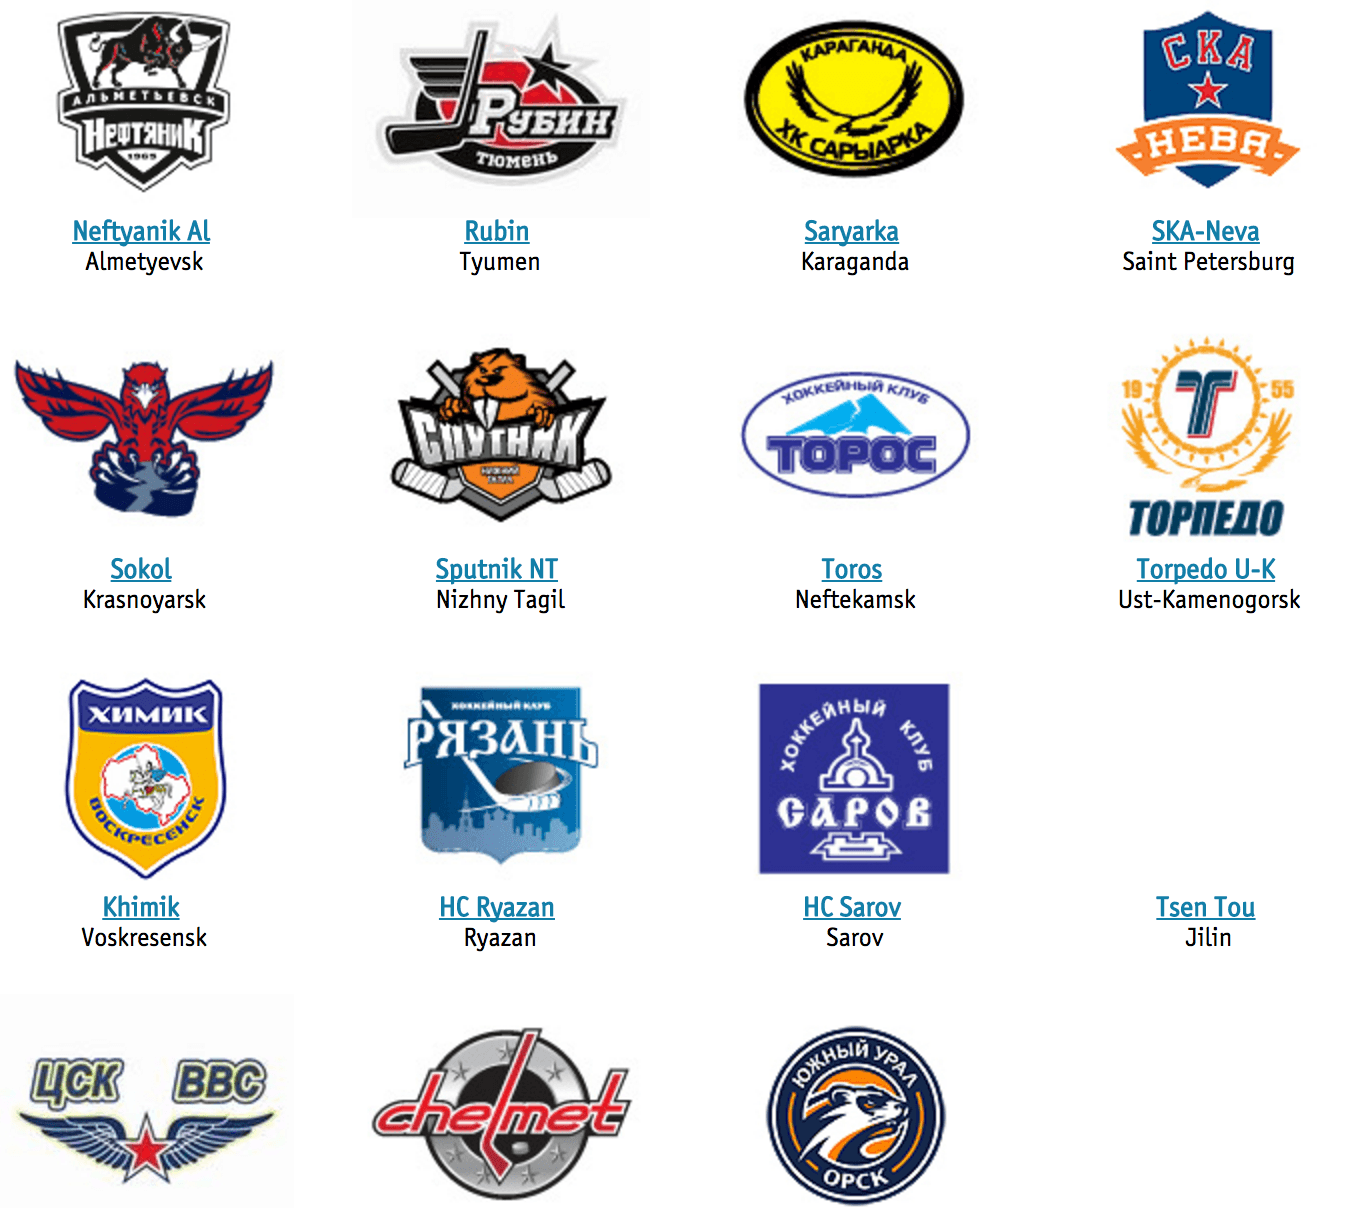 SHL Logo - Two SHL teams in Russia have logos extremely similar to these two